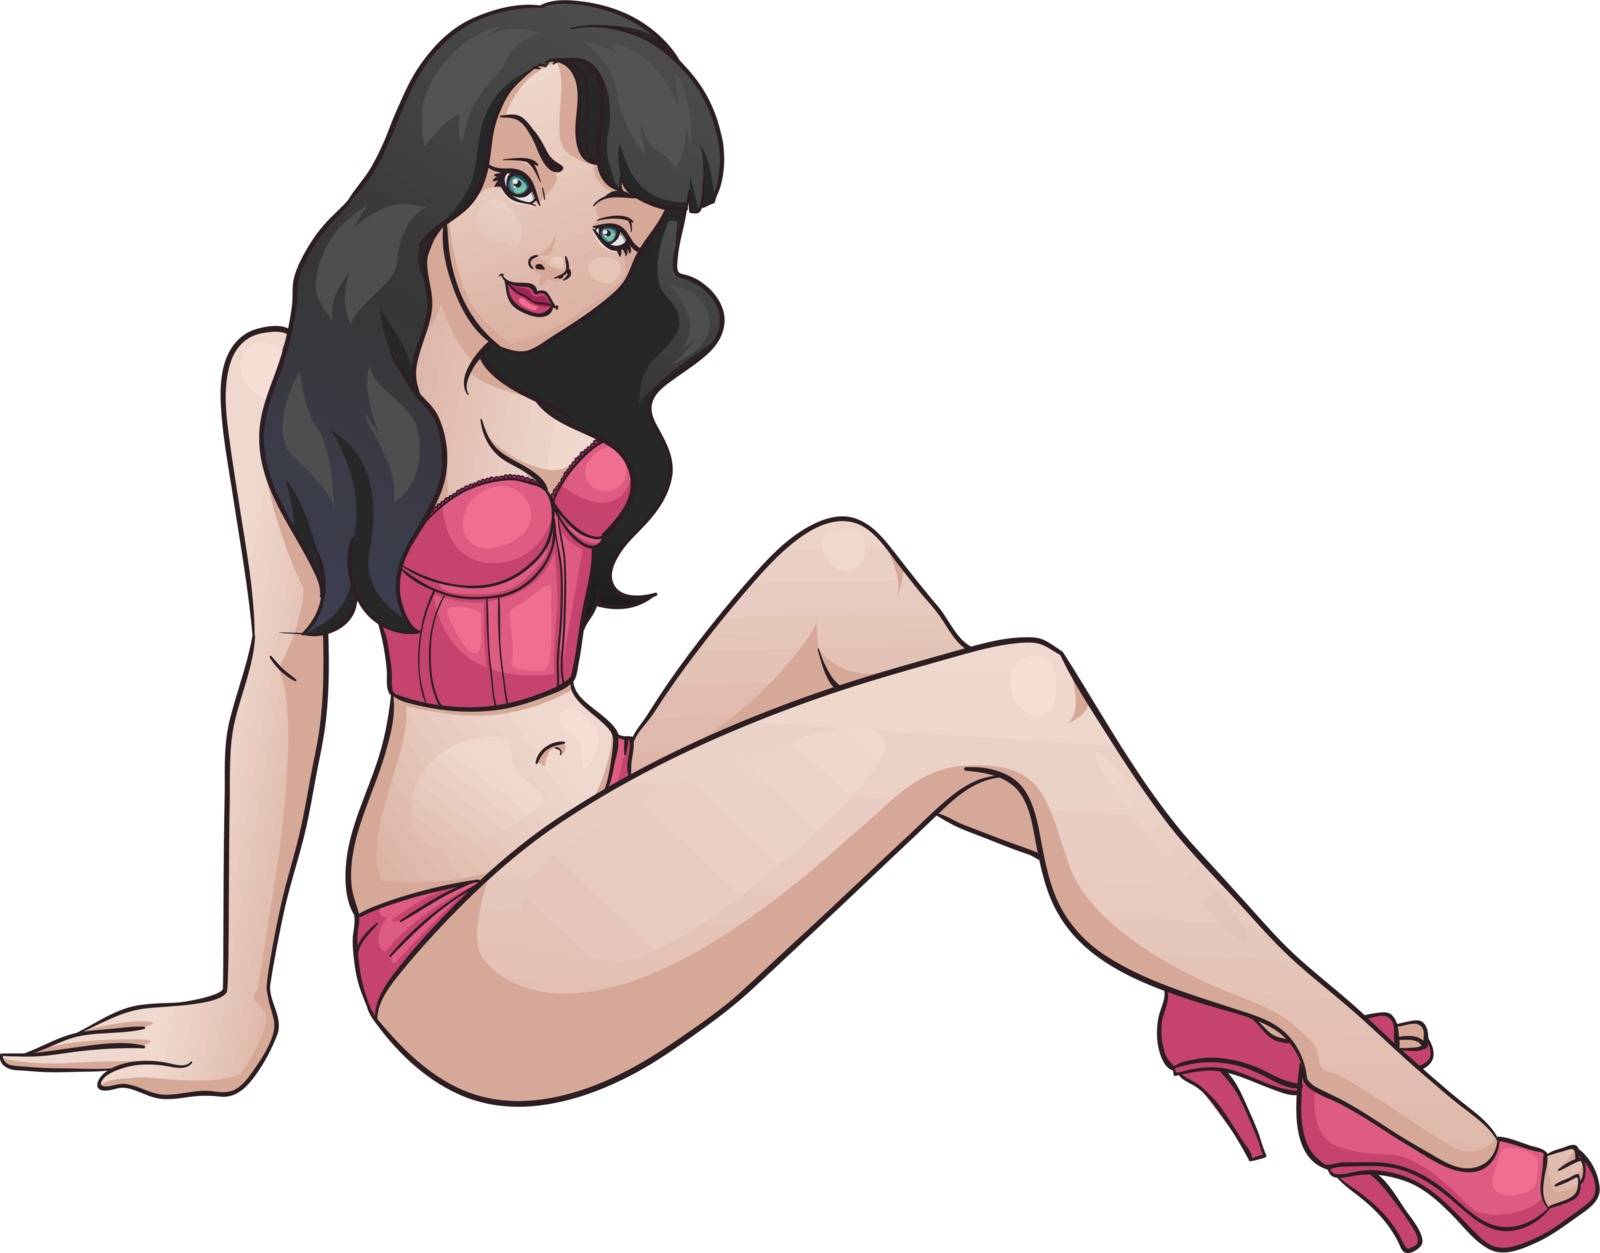 Vector illustration of a sexy cartoon woman, wearing a corselet and high heels.